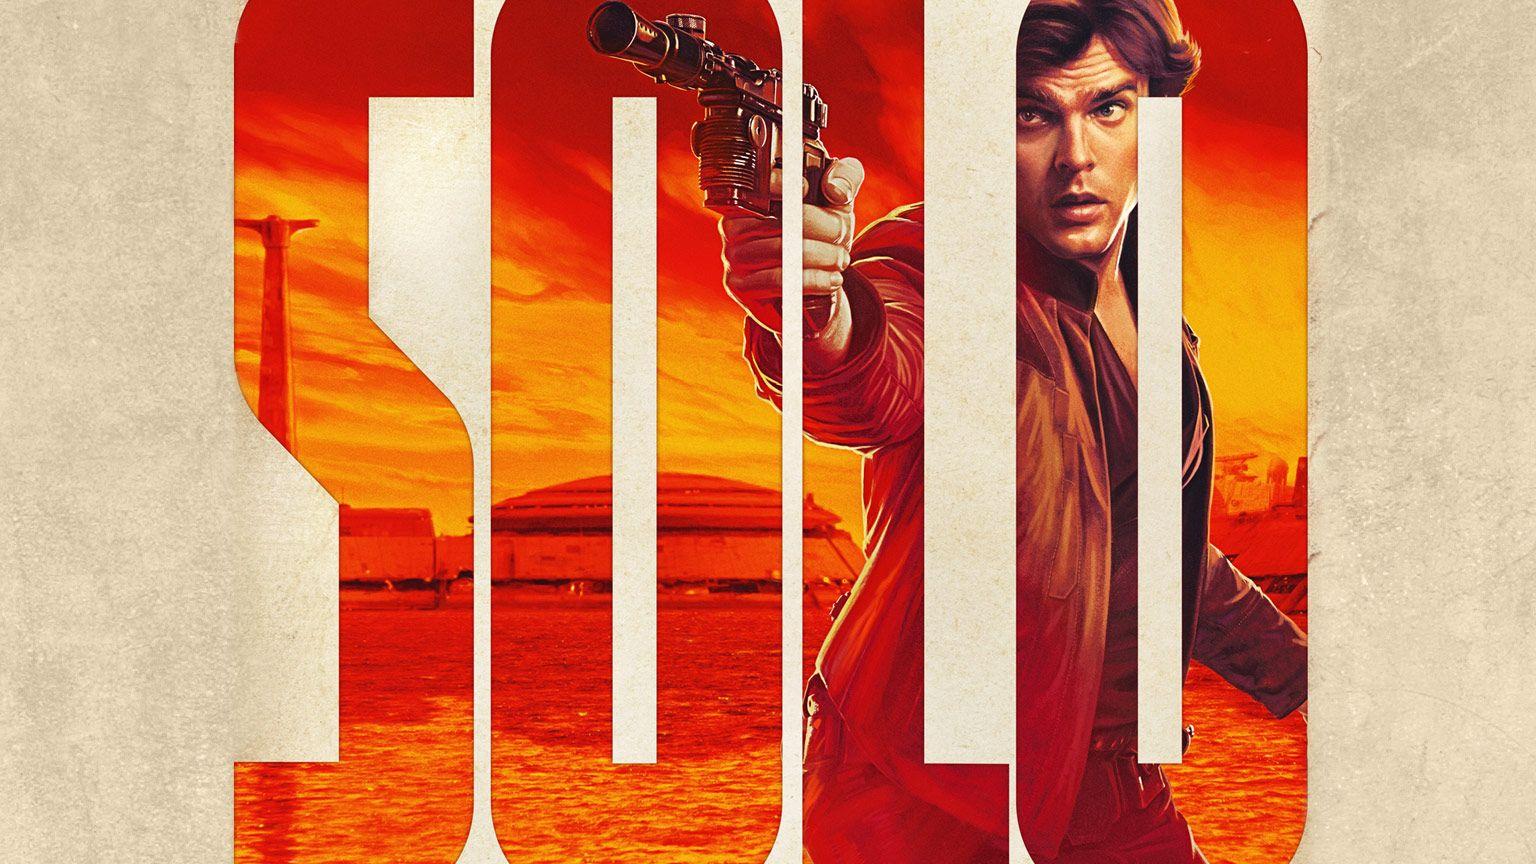 We Love These New Solo A Star Wars Story Teaser Posters